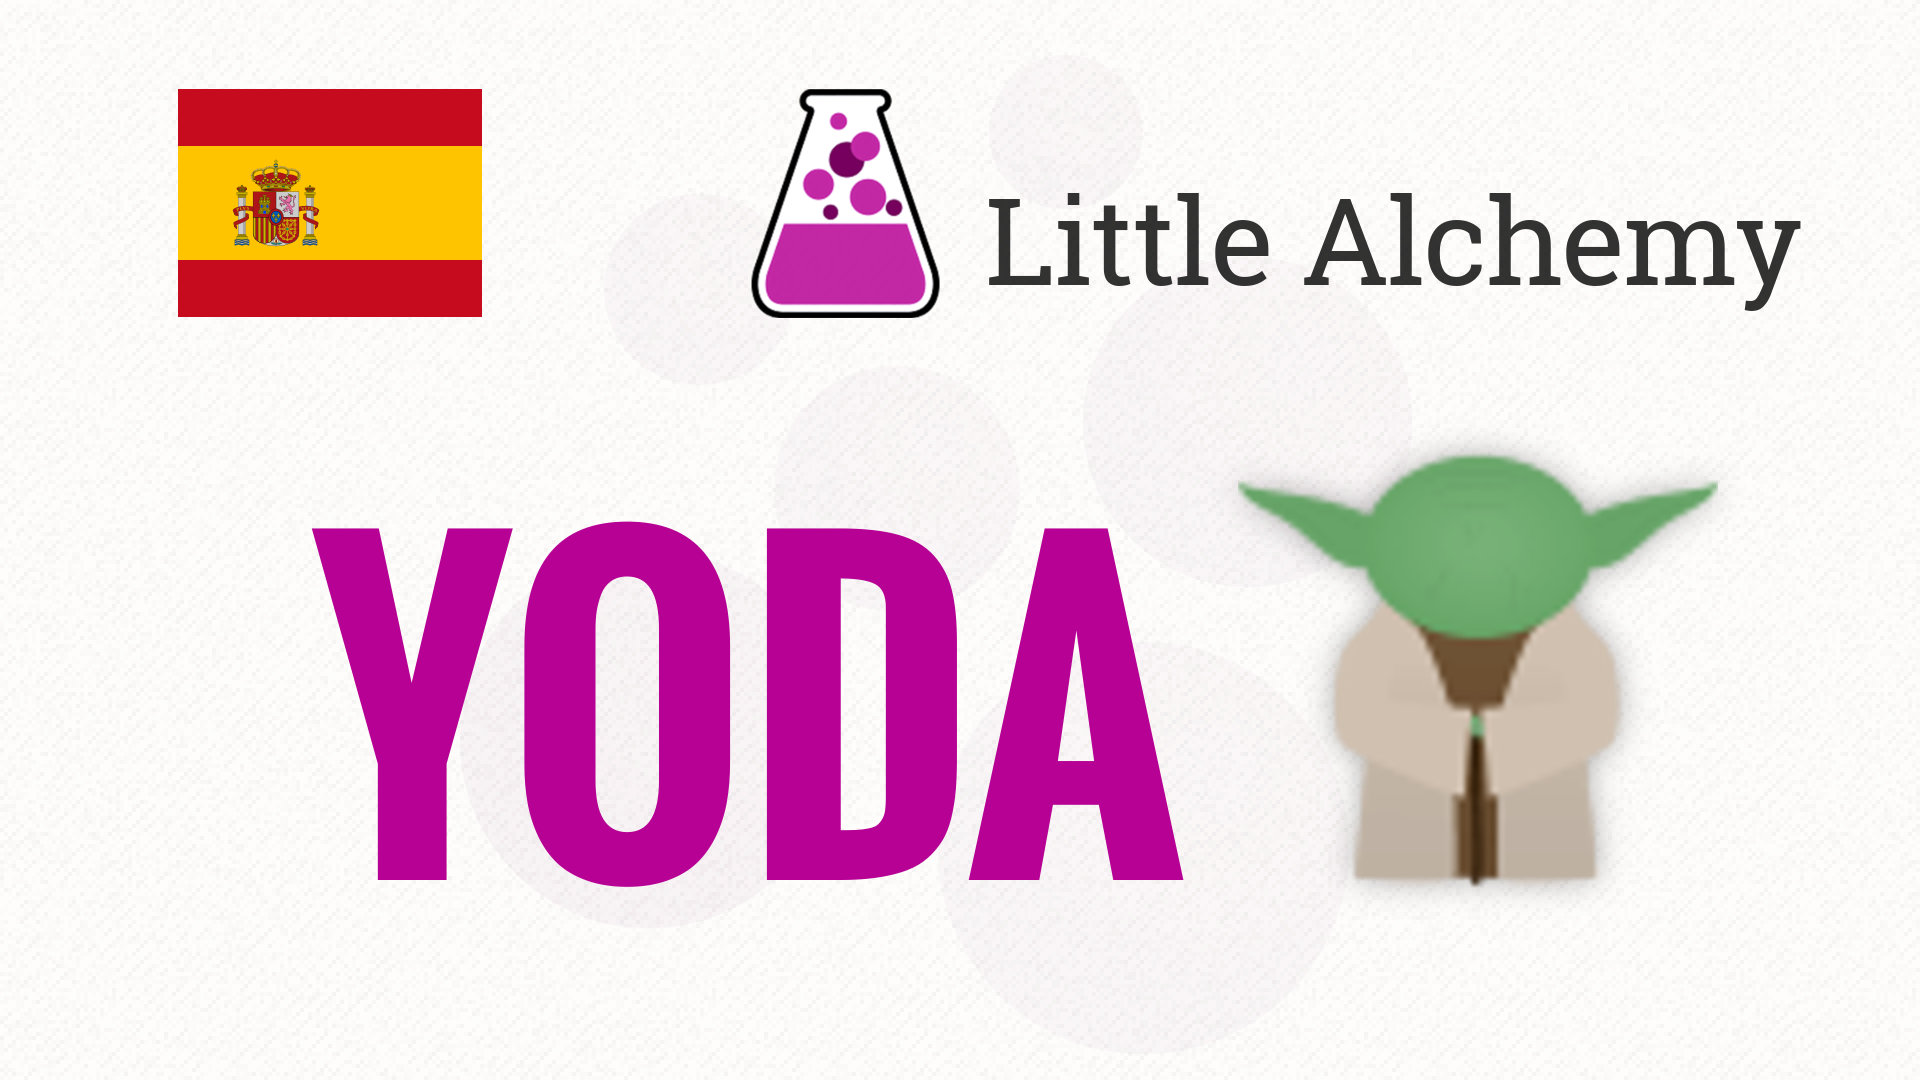 How To Make Yoda Little Alchemy - Kathleen Brown's Toddler Worksheets How To Make Baby Yoda In Little Alchemy 2